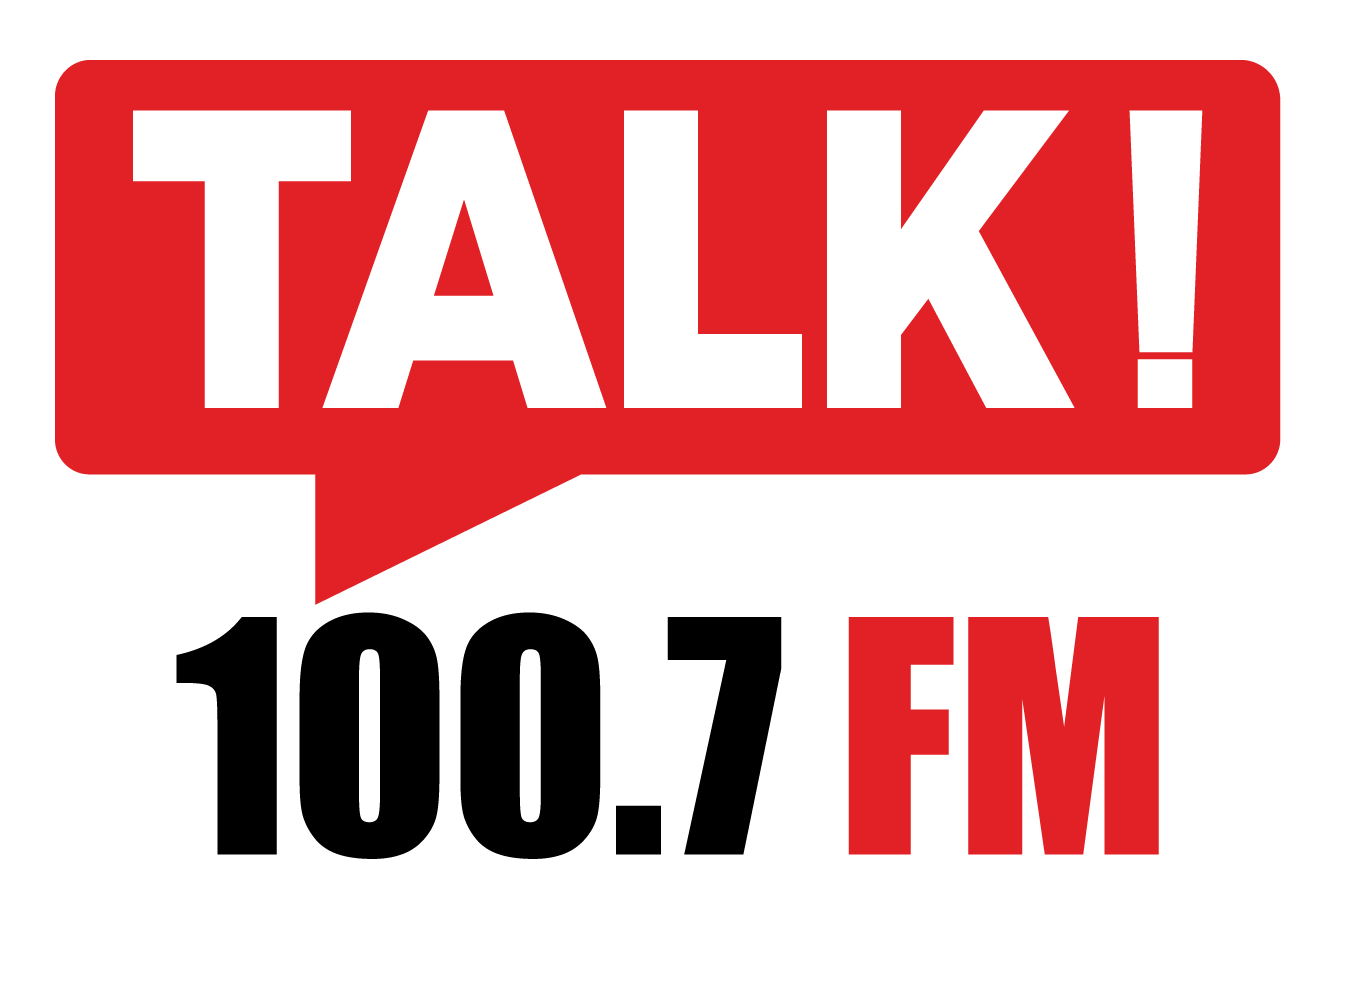 TALK! With Claudia- Christmas, New York State, and More